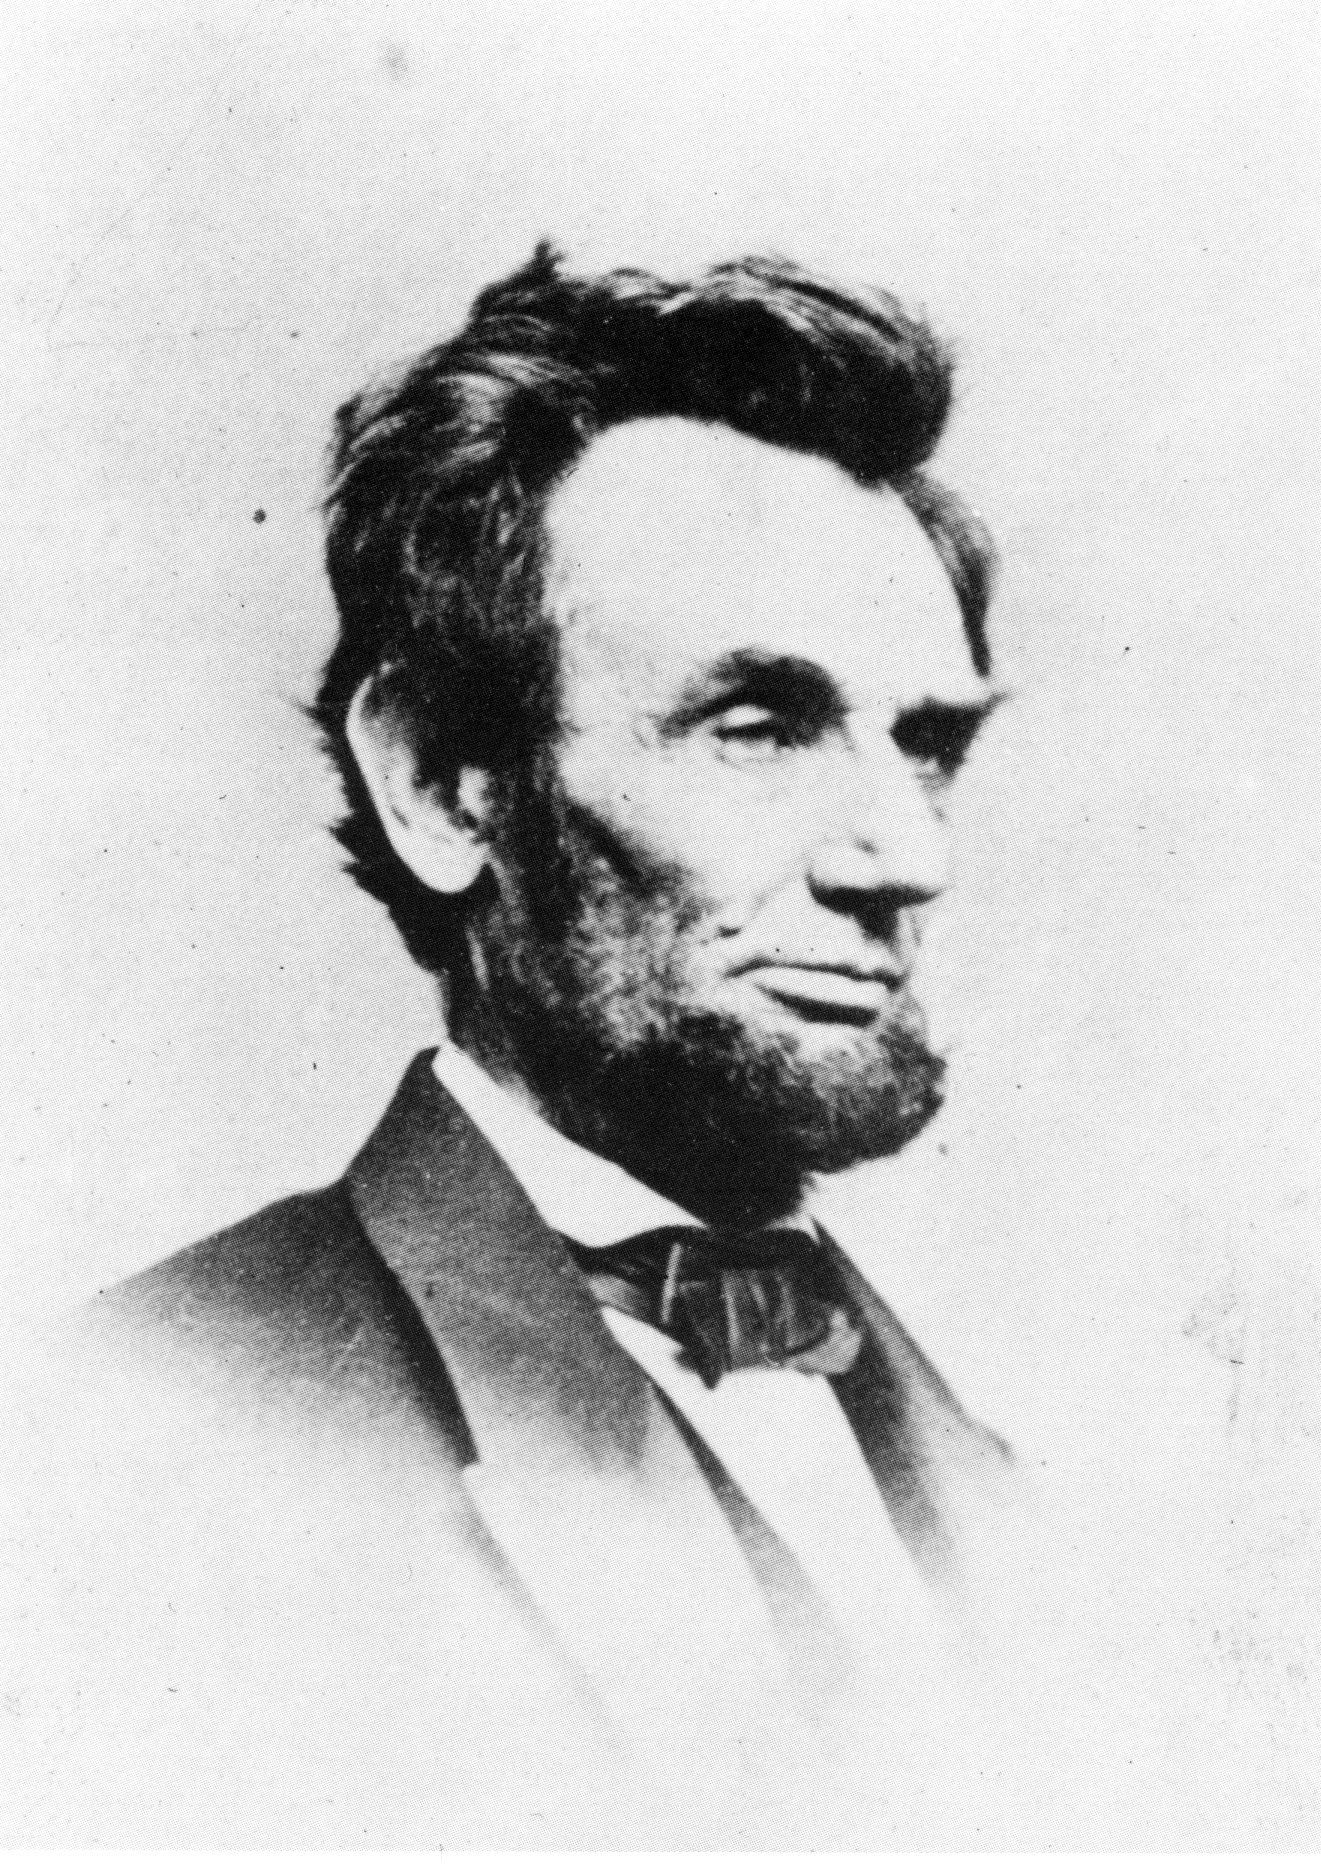 Abraham Lincoln, 1863 (Library of Congress)